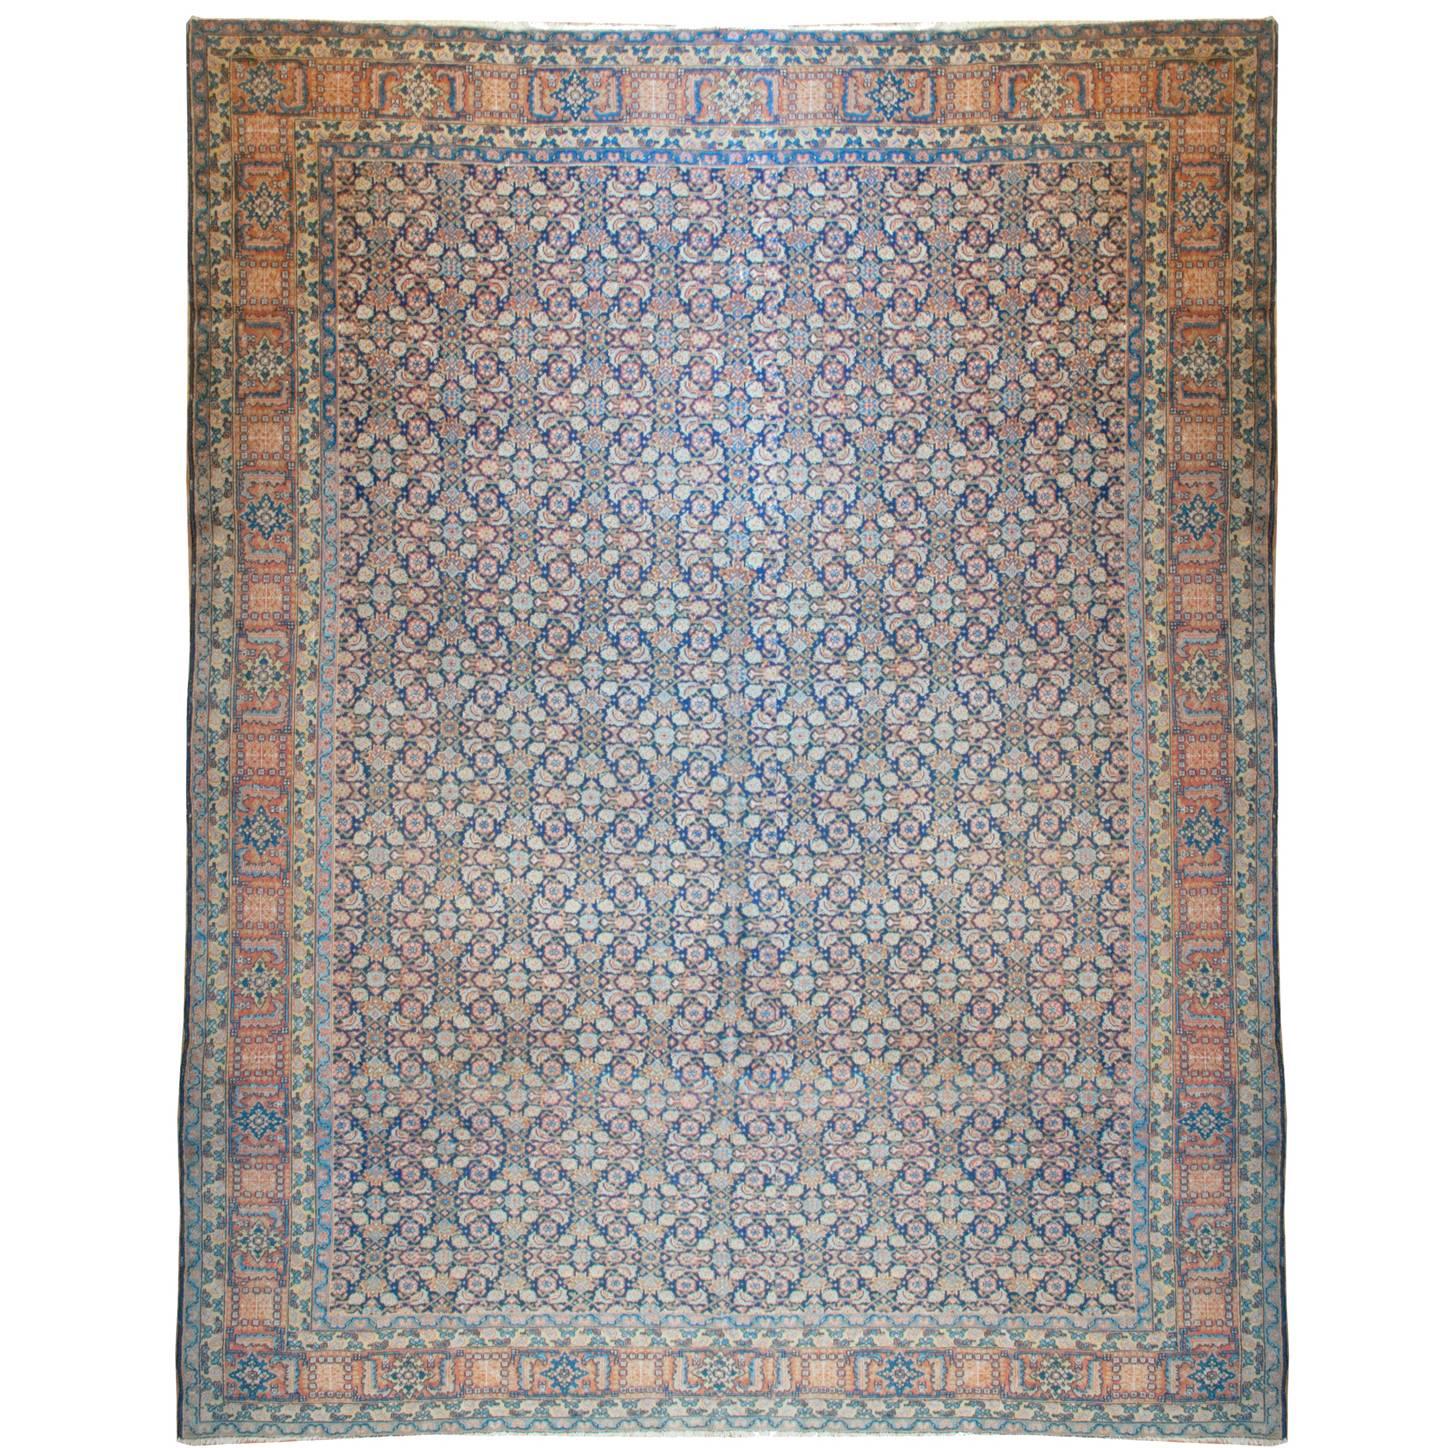 Remarkable 19th Century Malayer Rug For Sale